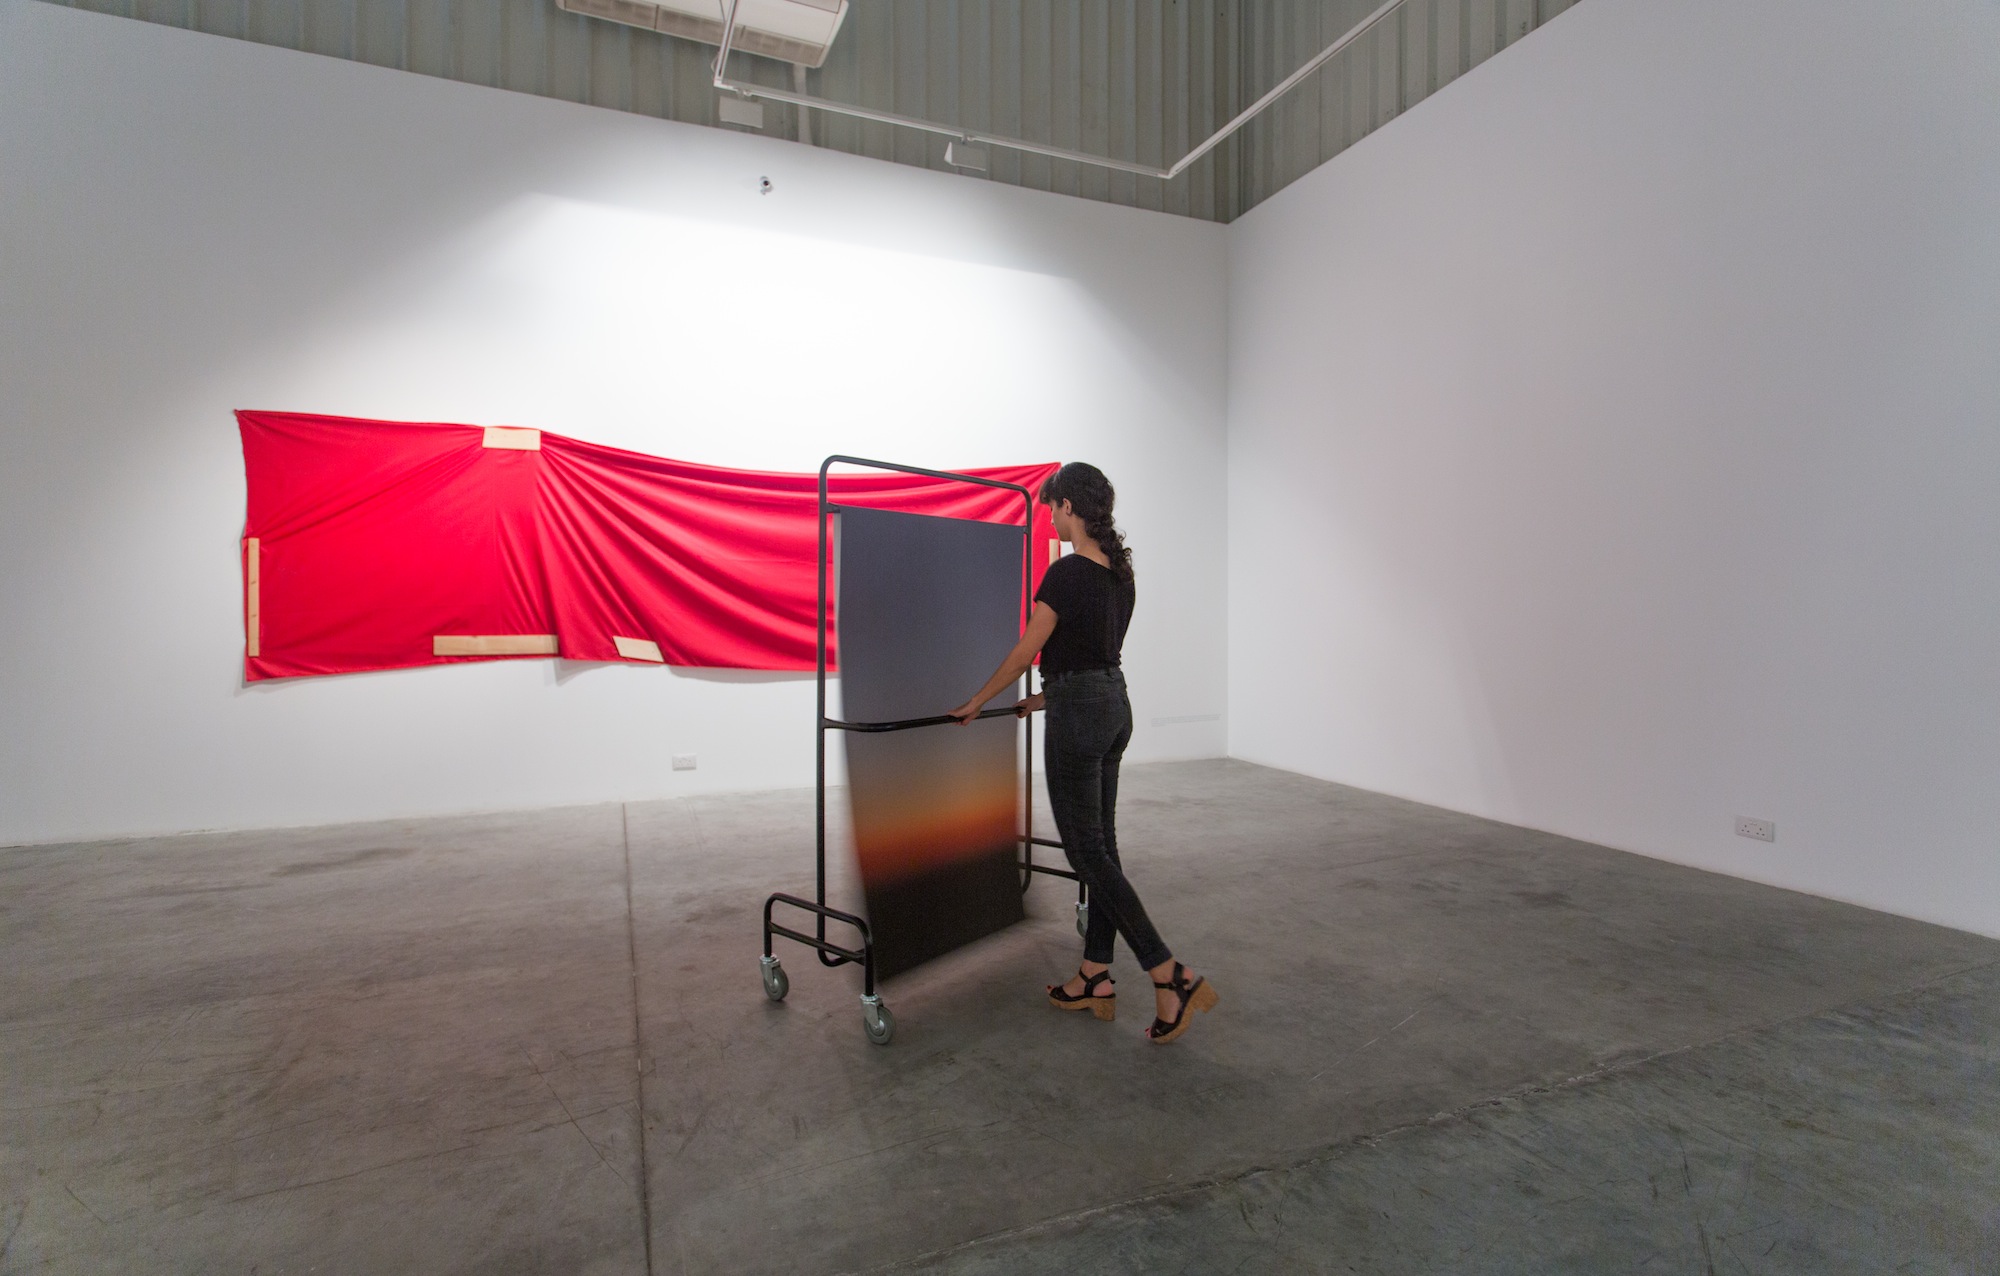  Installation view / Intangible experiences, arrangements, and manoeuvres 